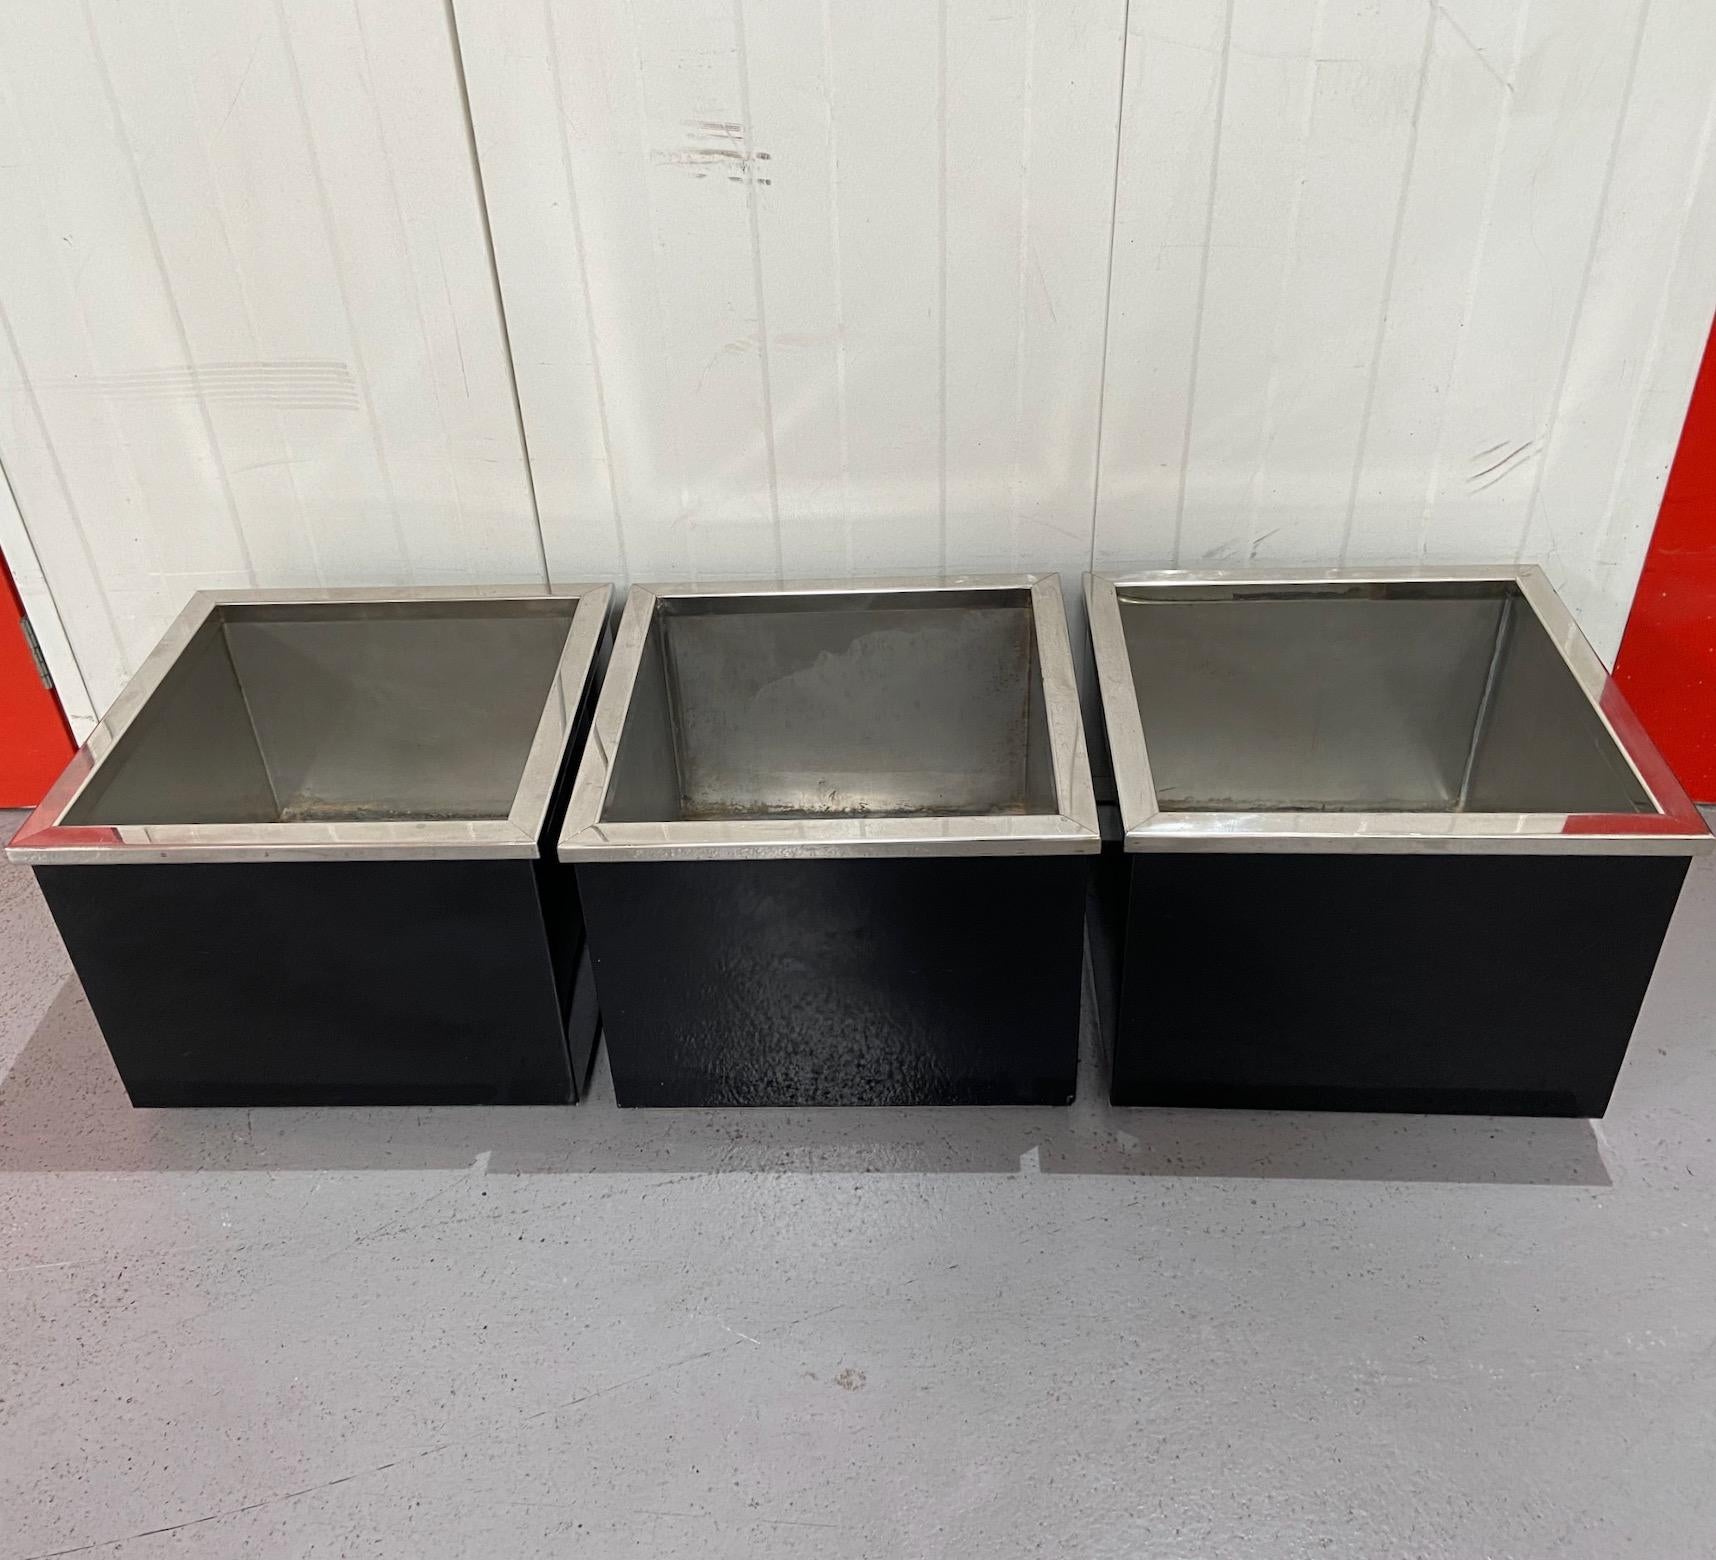 20th Century 1960s-70s black enamel and chrome metal cubic planters, manner of Willy Rizzo For Sale